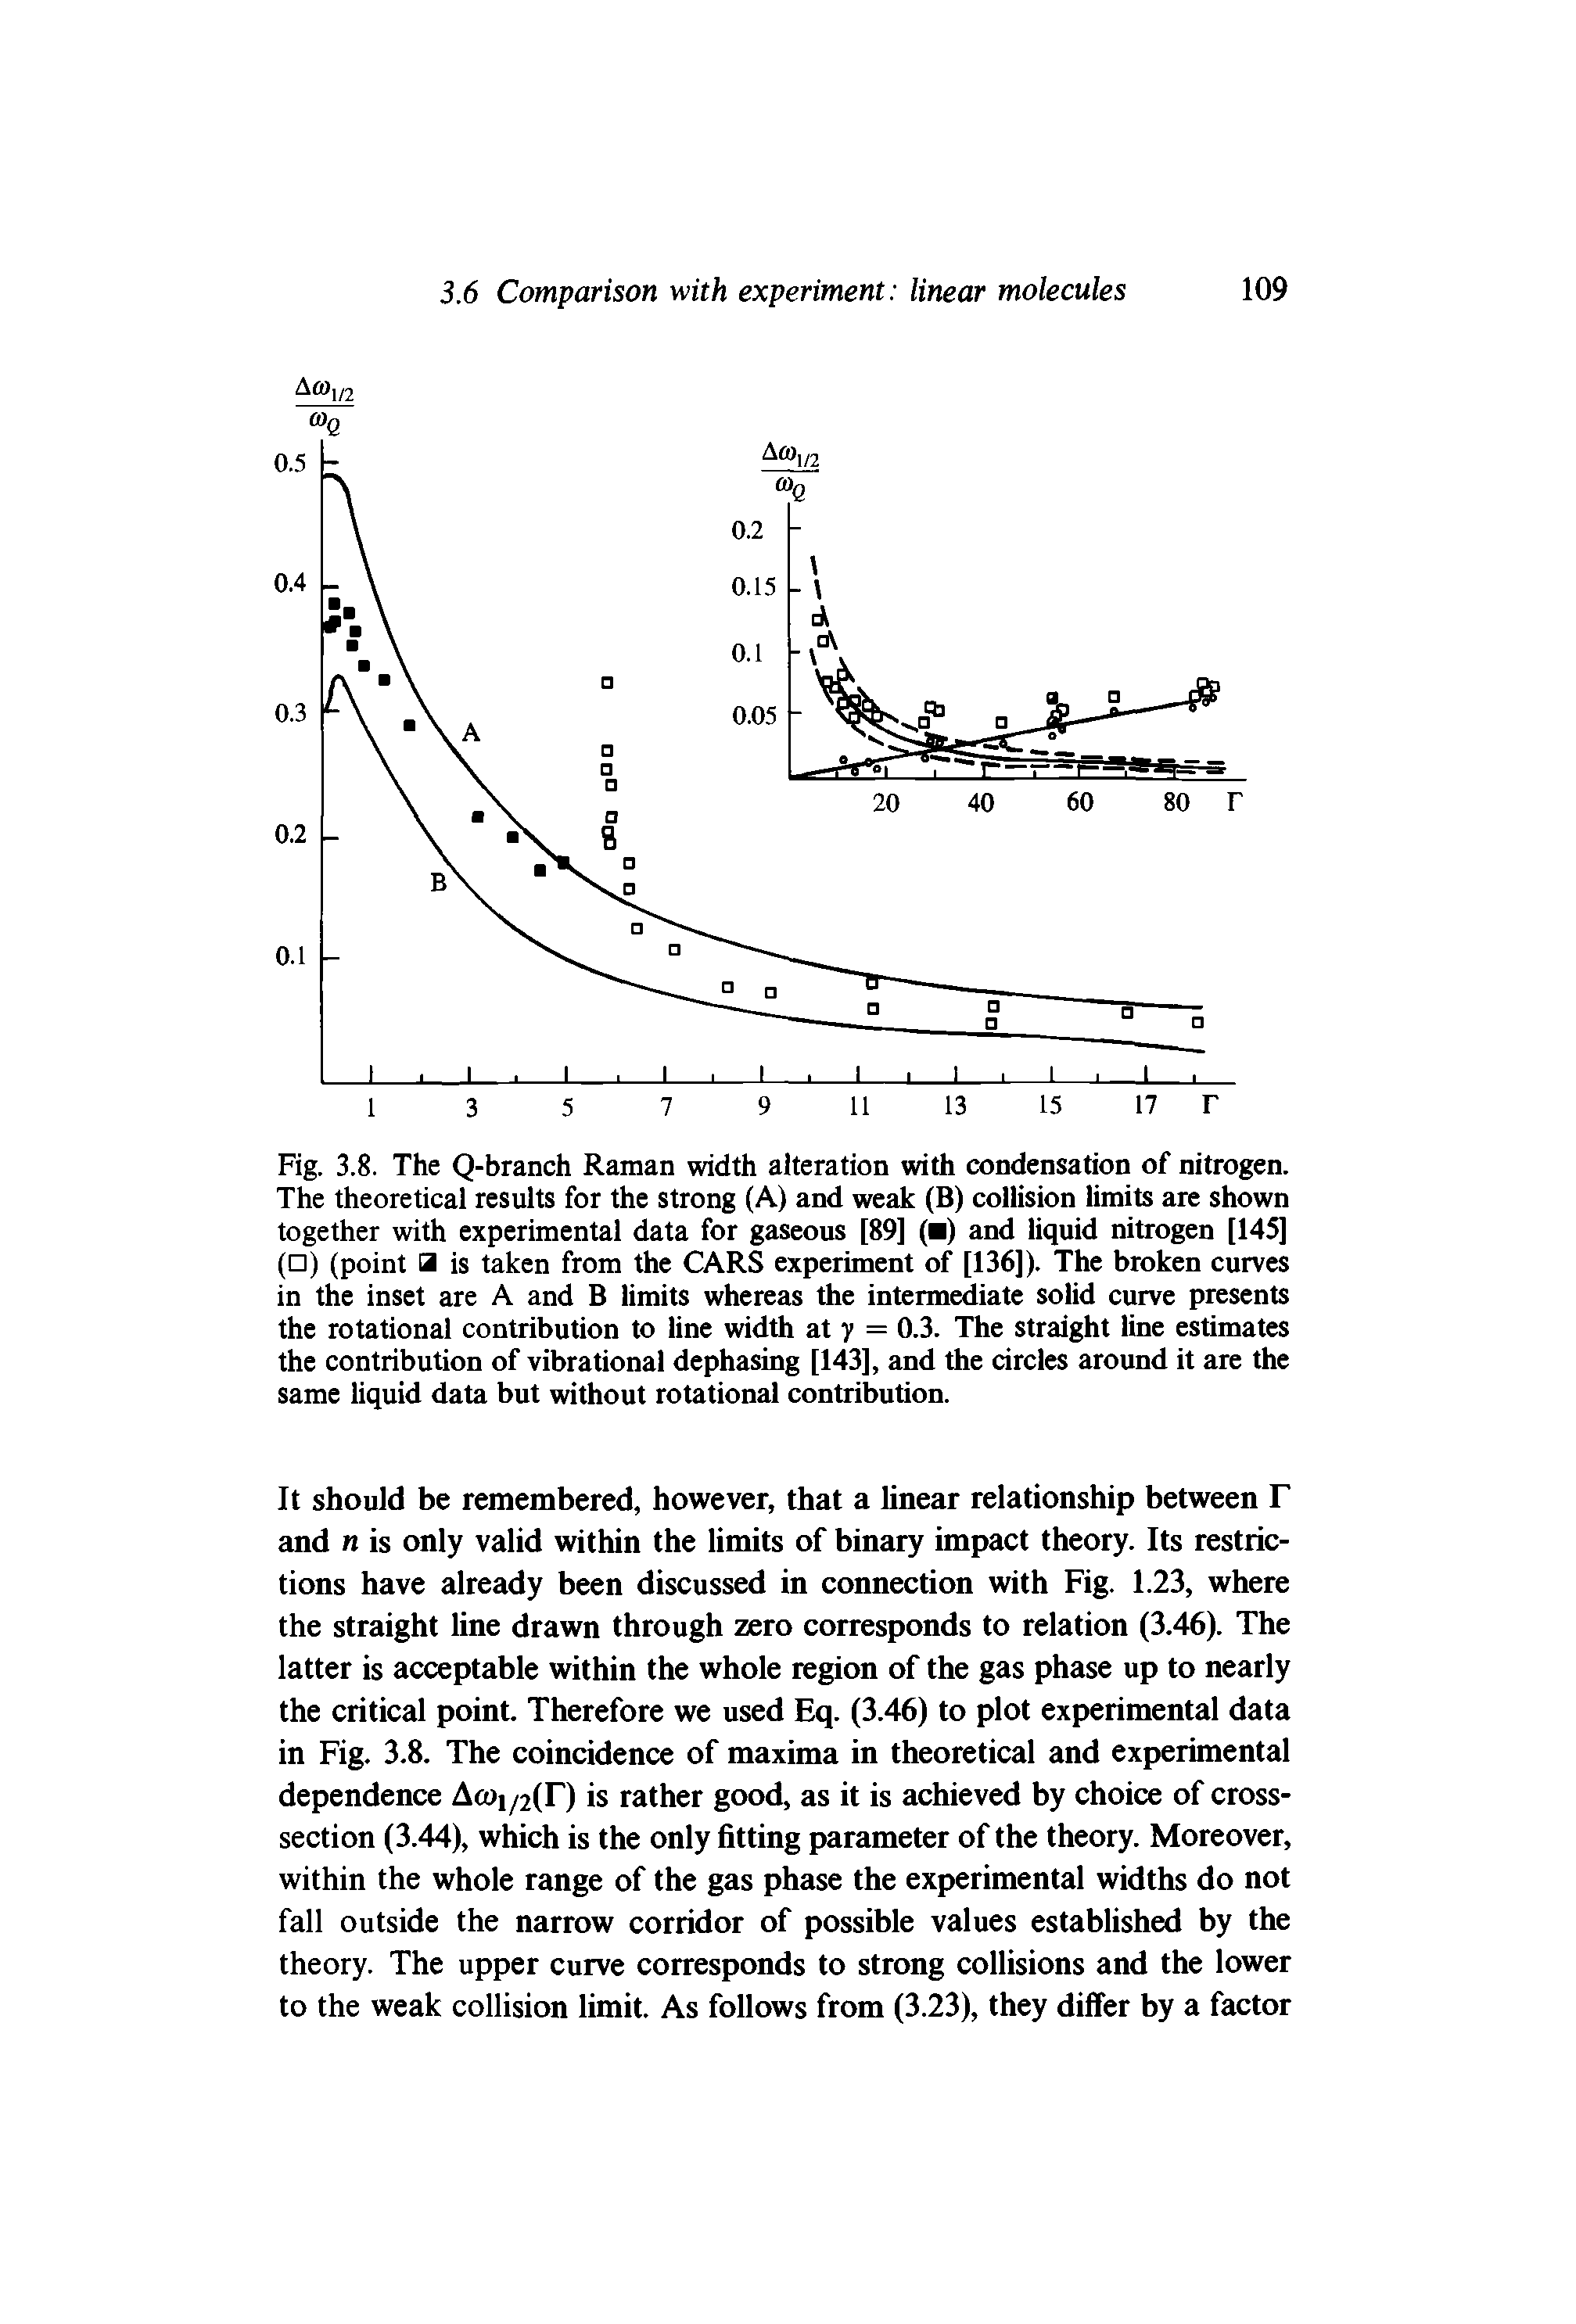 Fig. 3.8. The Q-branch Raman width alteration with condensation of nitrogen. The theoretical results for the strong (A) and weak (B) collision limits are shown together with experimental data for gaseous [89] ( ) and liquid nitrogen [145] ( ) (point a is taken from the CARS experiment of [136]). The broken curves in the inset are A and B limits whereas the intermediate solid curve presents the rotational contribution to line width at y = 0.3. The straight line estimates the contribution of vibrational dephasing [143], and the circles around it are the same liquid data but without rotational contribution.